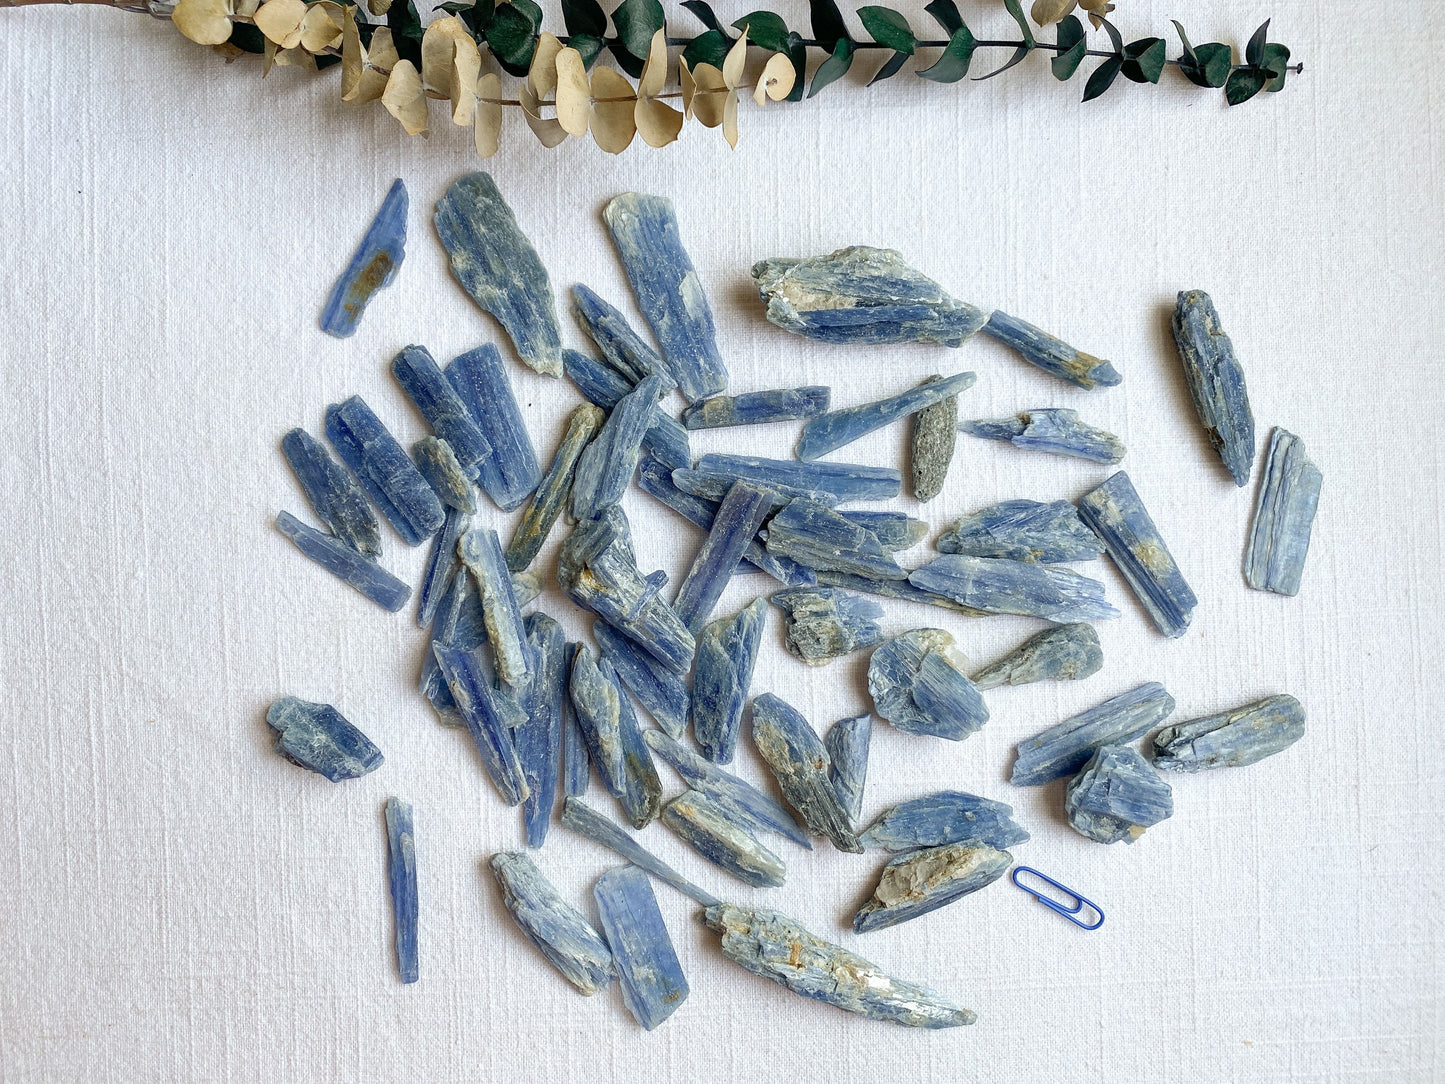 Bulk Raw Blue Kyanite - Choose 4, 8 or 16 ounces (1/4, 1/2 or 1 pound) Wholesale Crystals